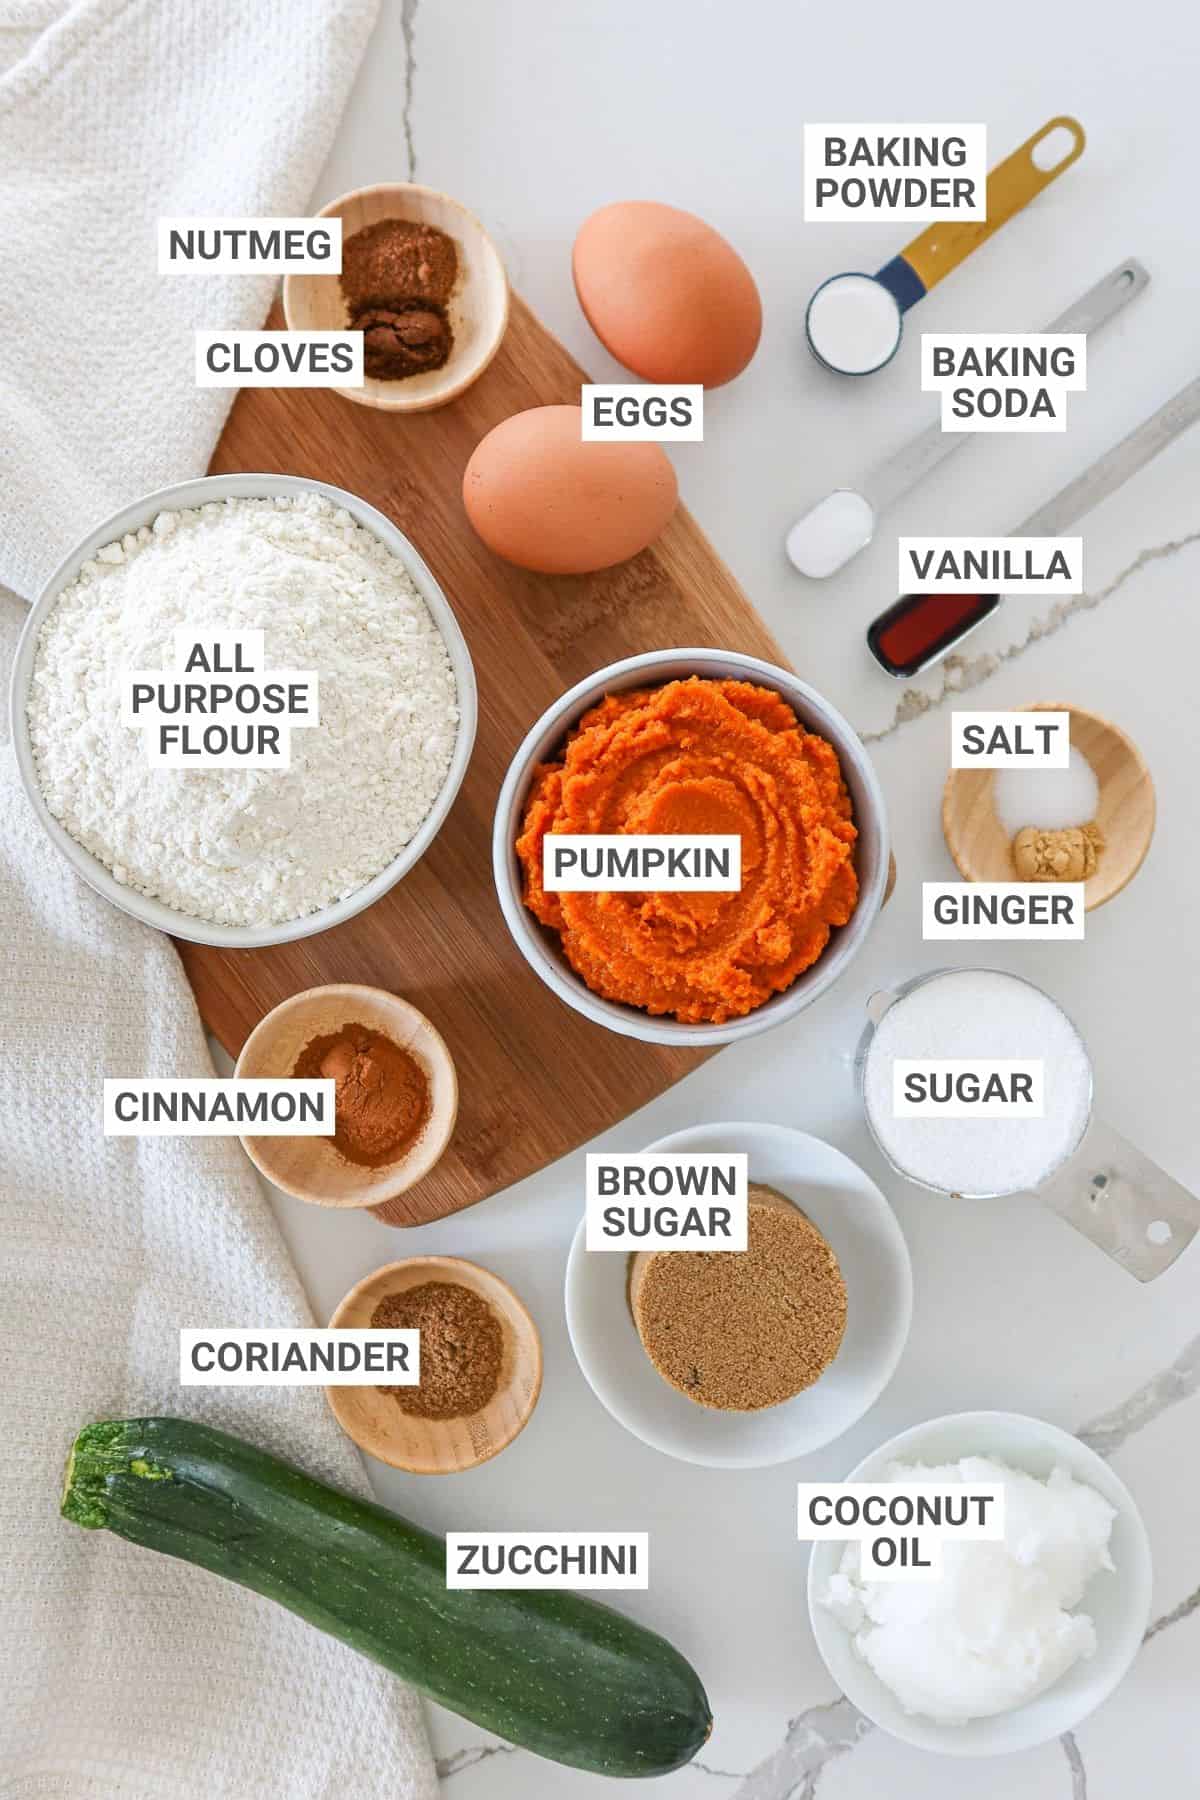 Ingredients for pumpkin zucchini muffins arranged on a white countertop with text overlay labels.